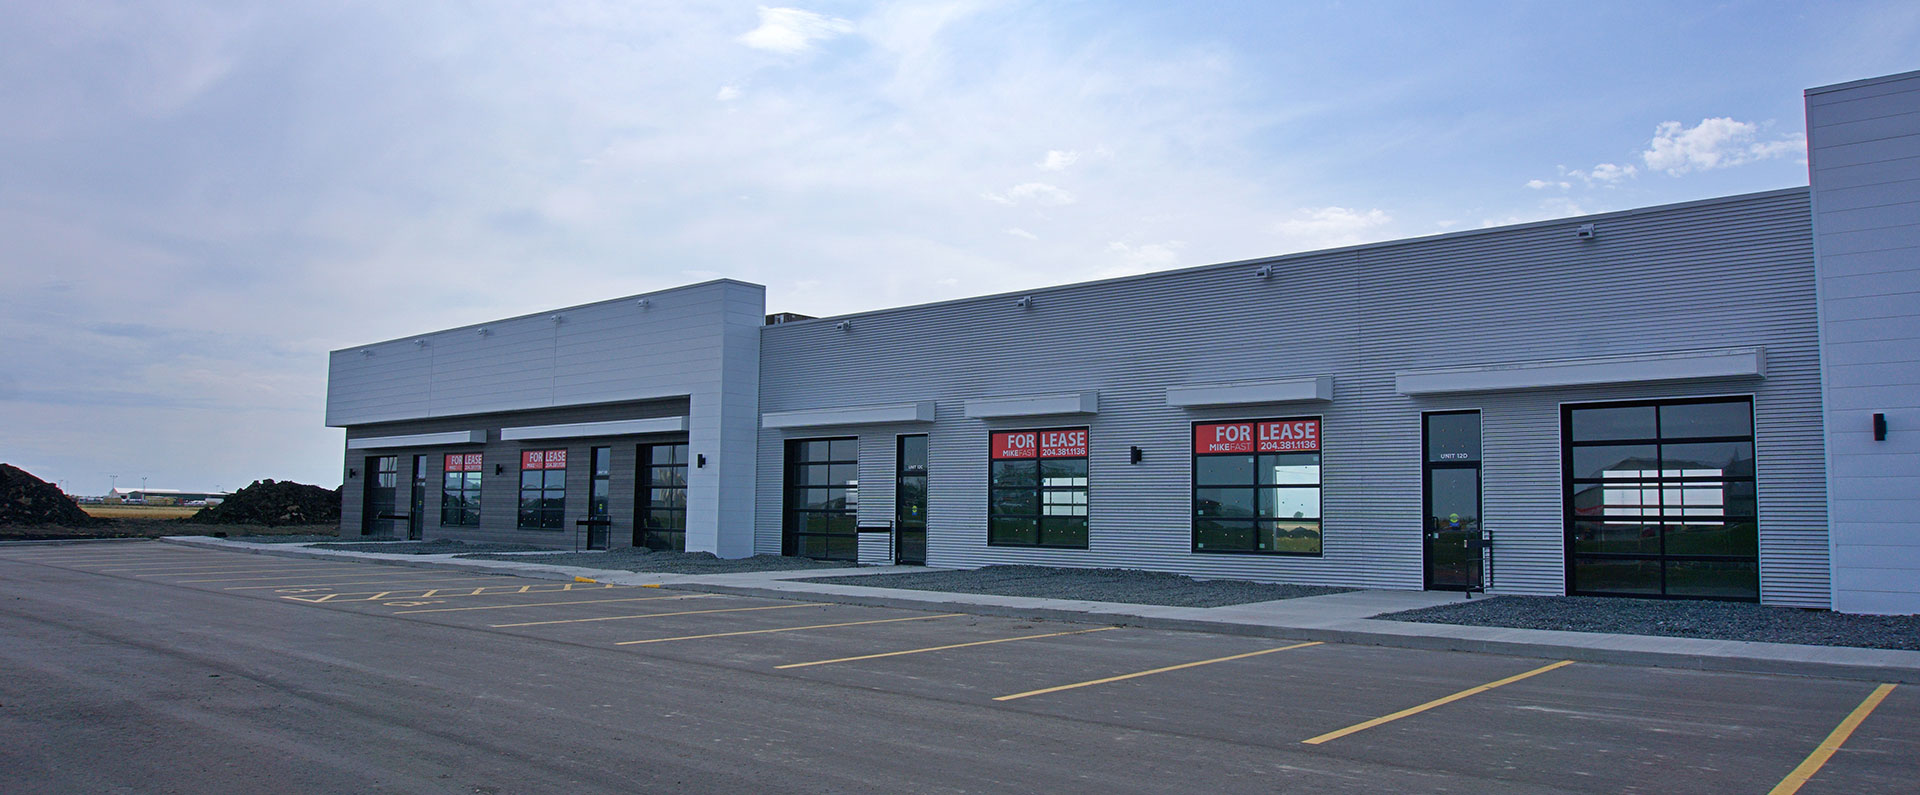 steinbach commercial real estate